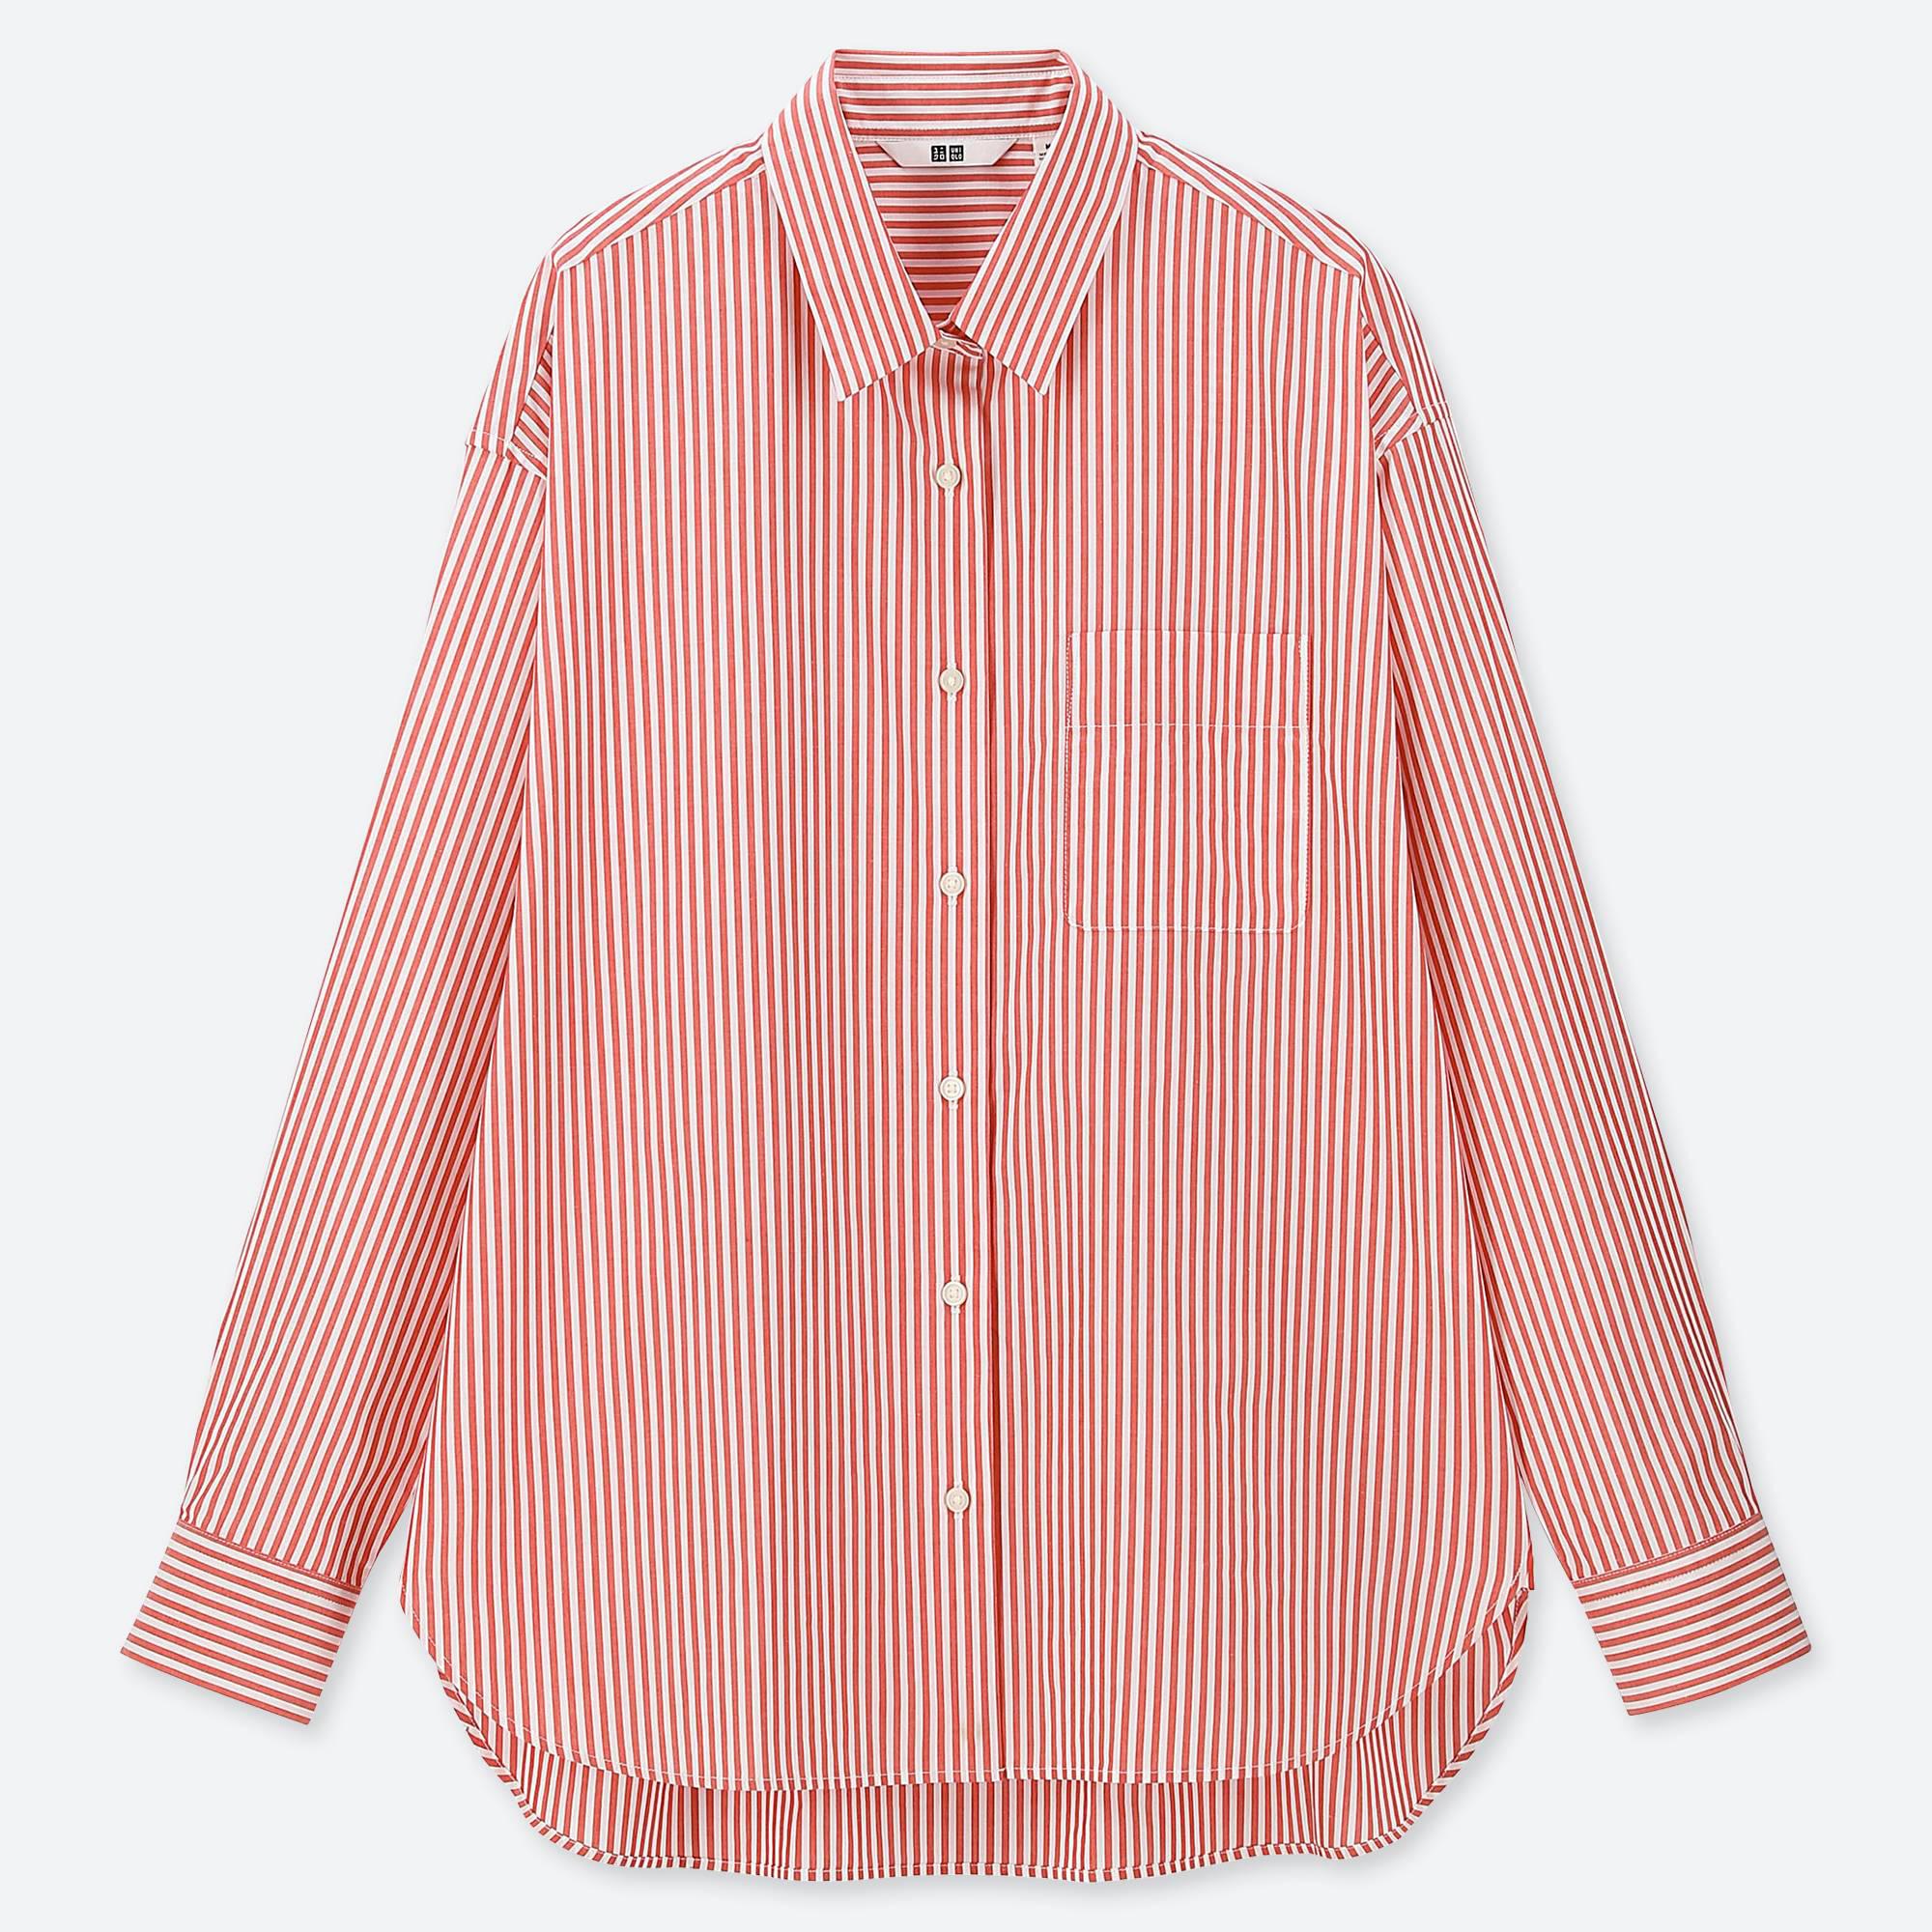 Lyst - Uniqlo Women Extra Fine Cotton Striped Long-sleeve Shirt in Red